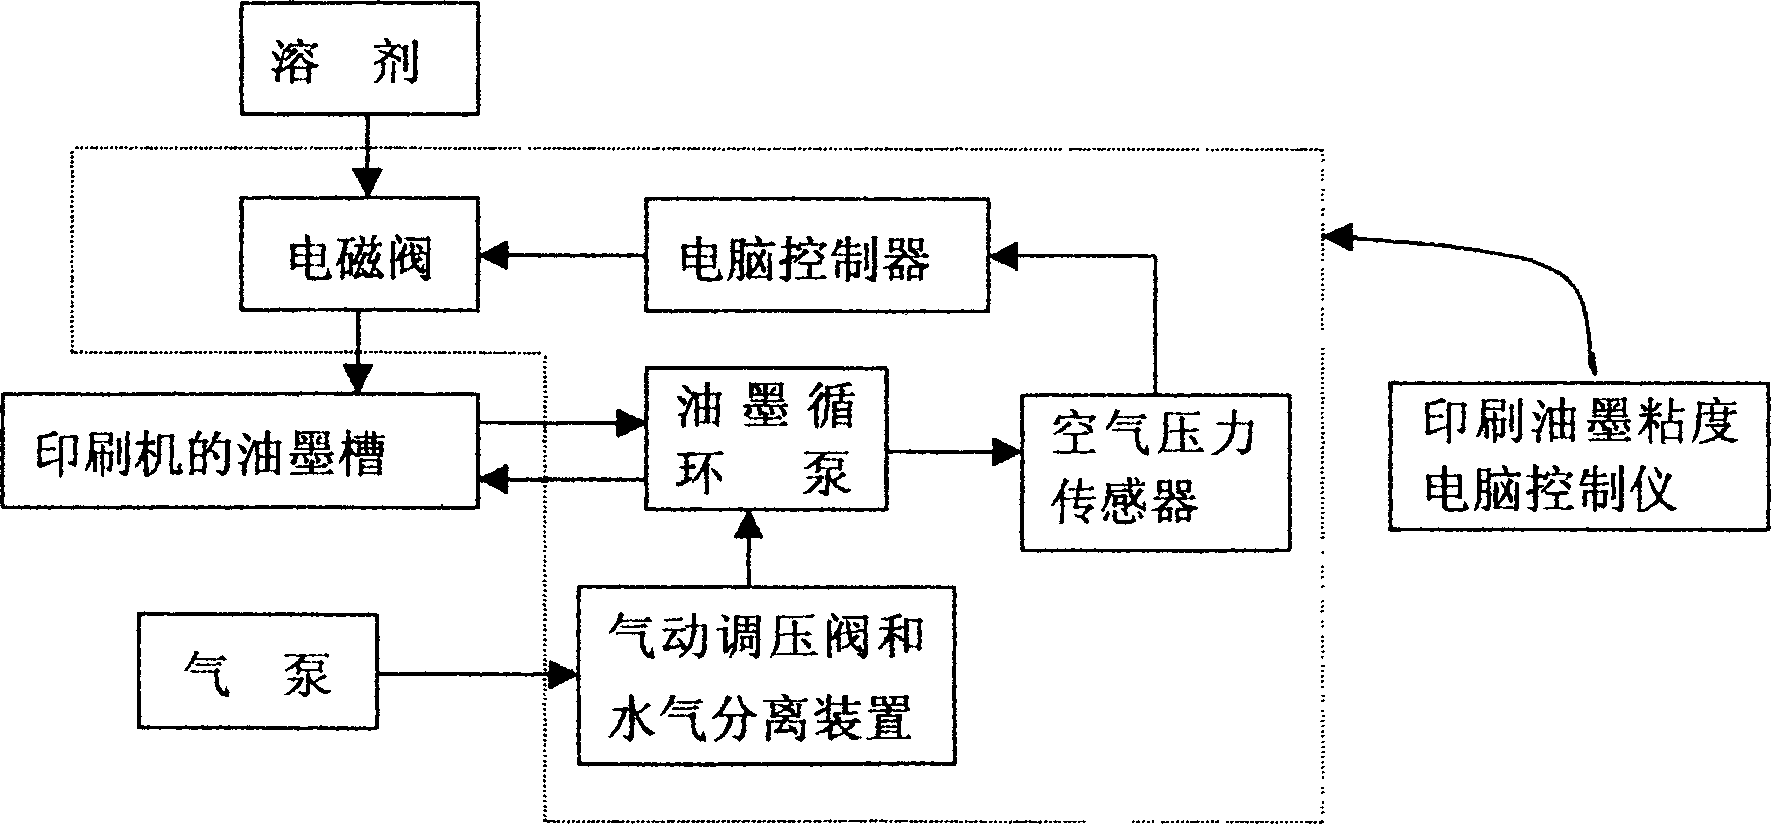 Computer control apparatus for printing ink viscosity